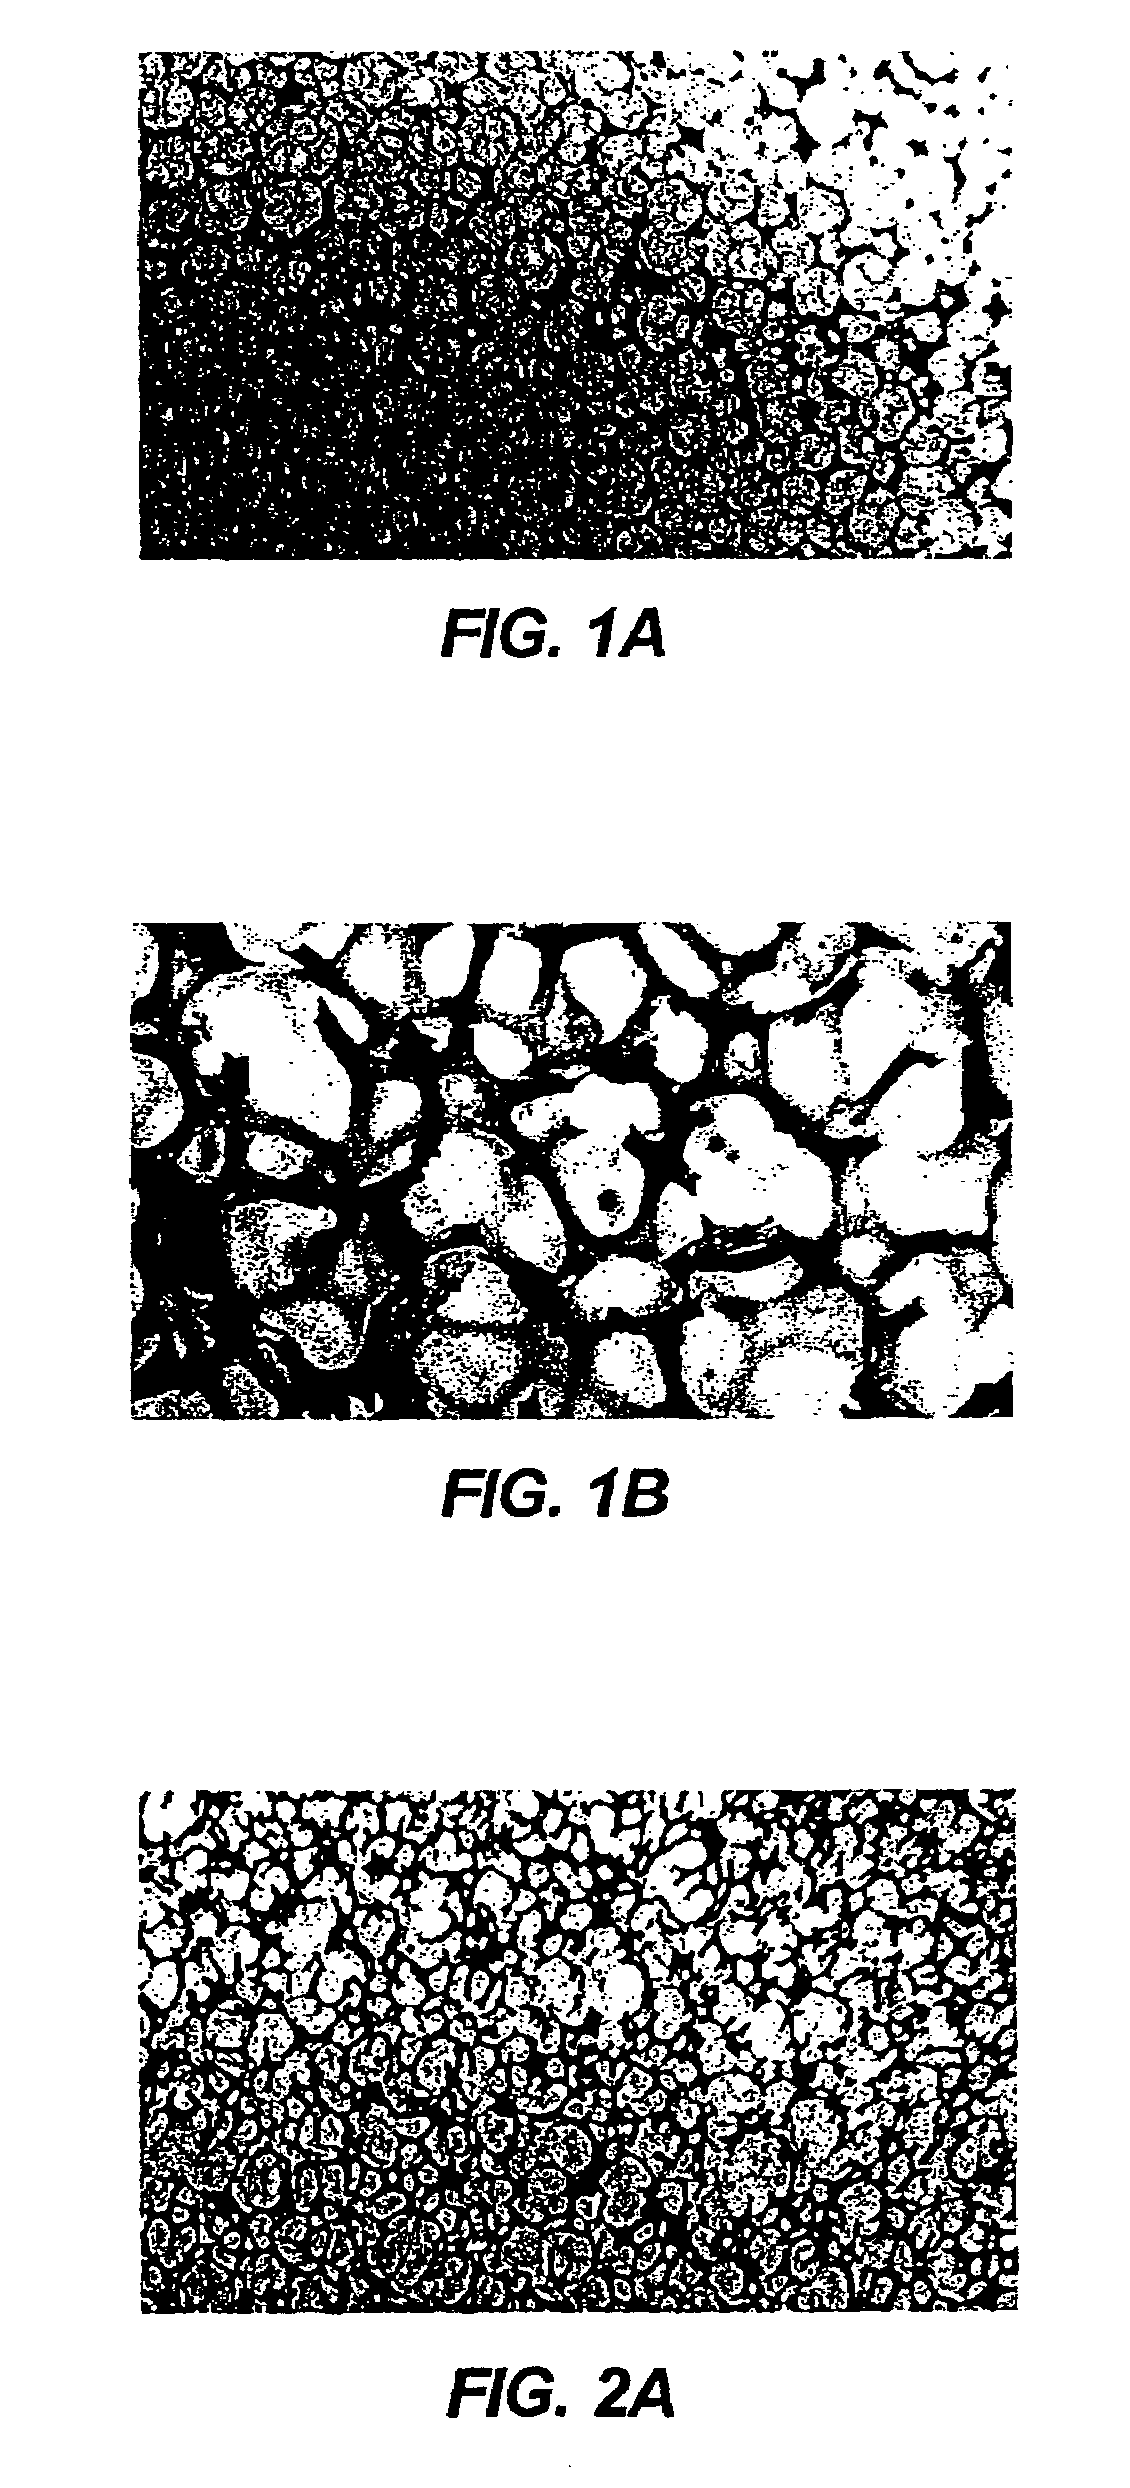 Reticulated material body support and method